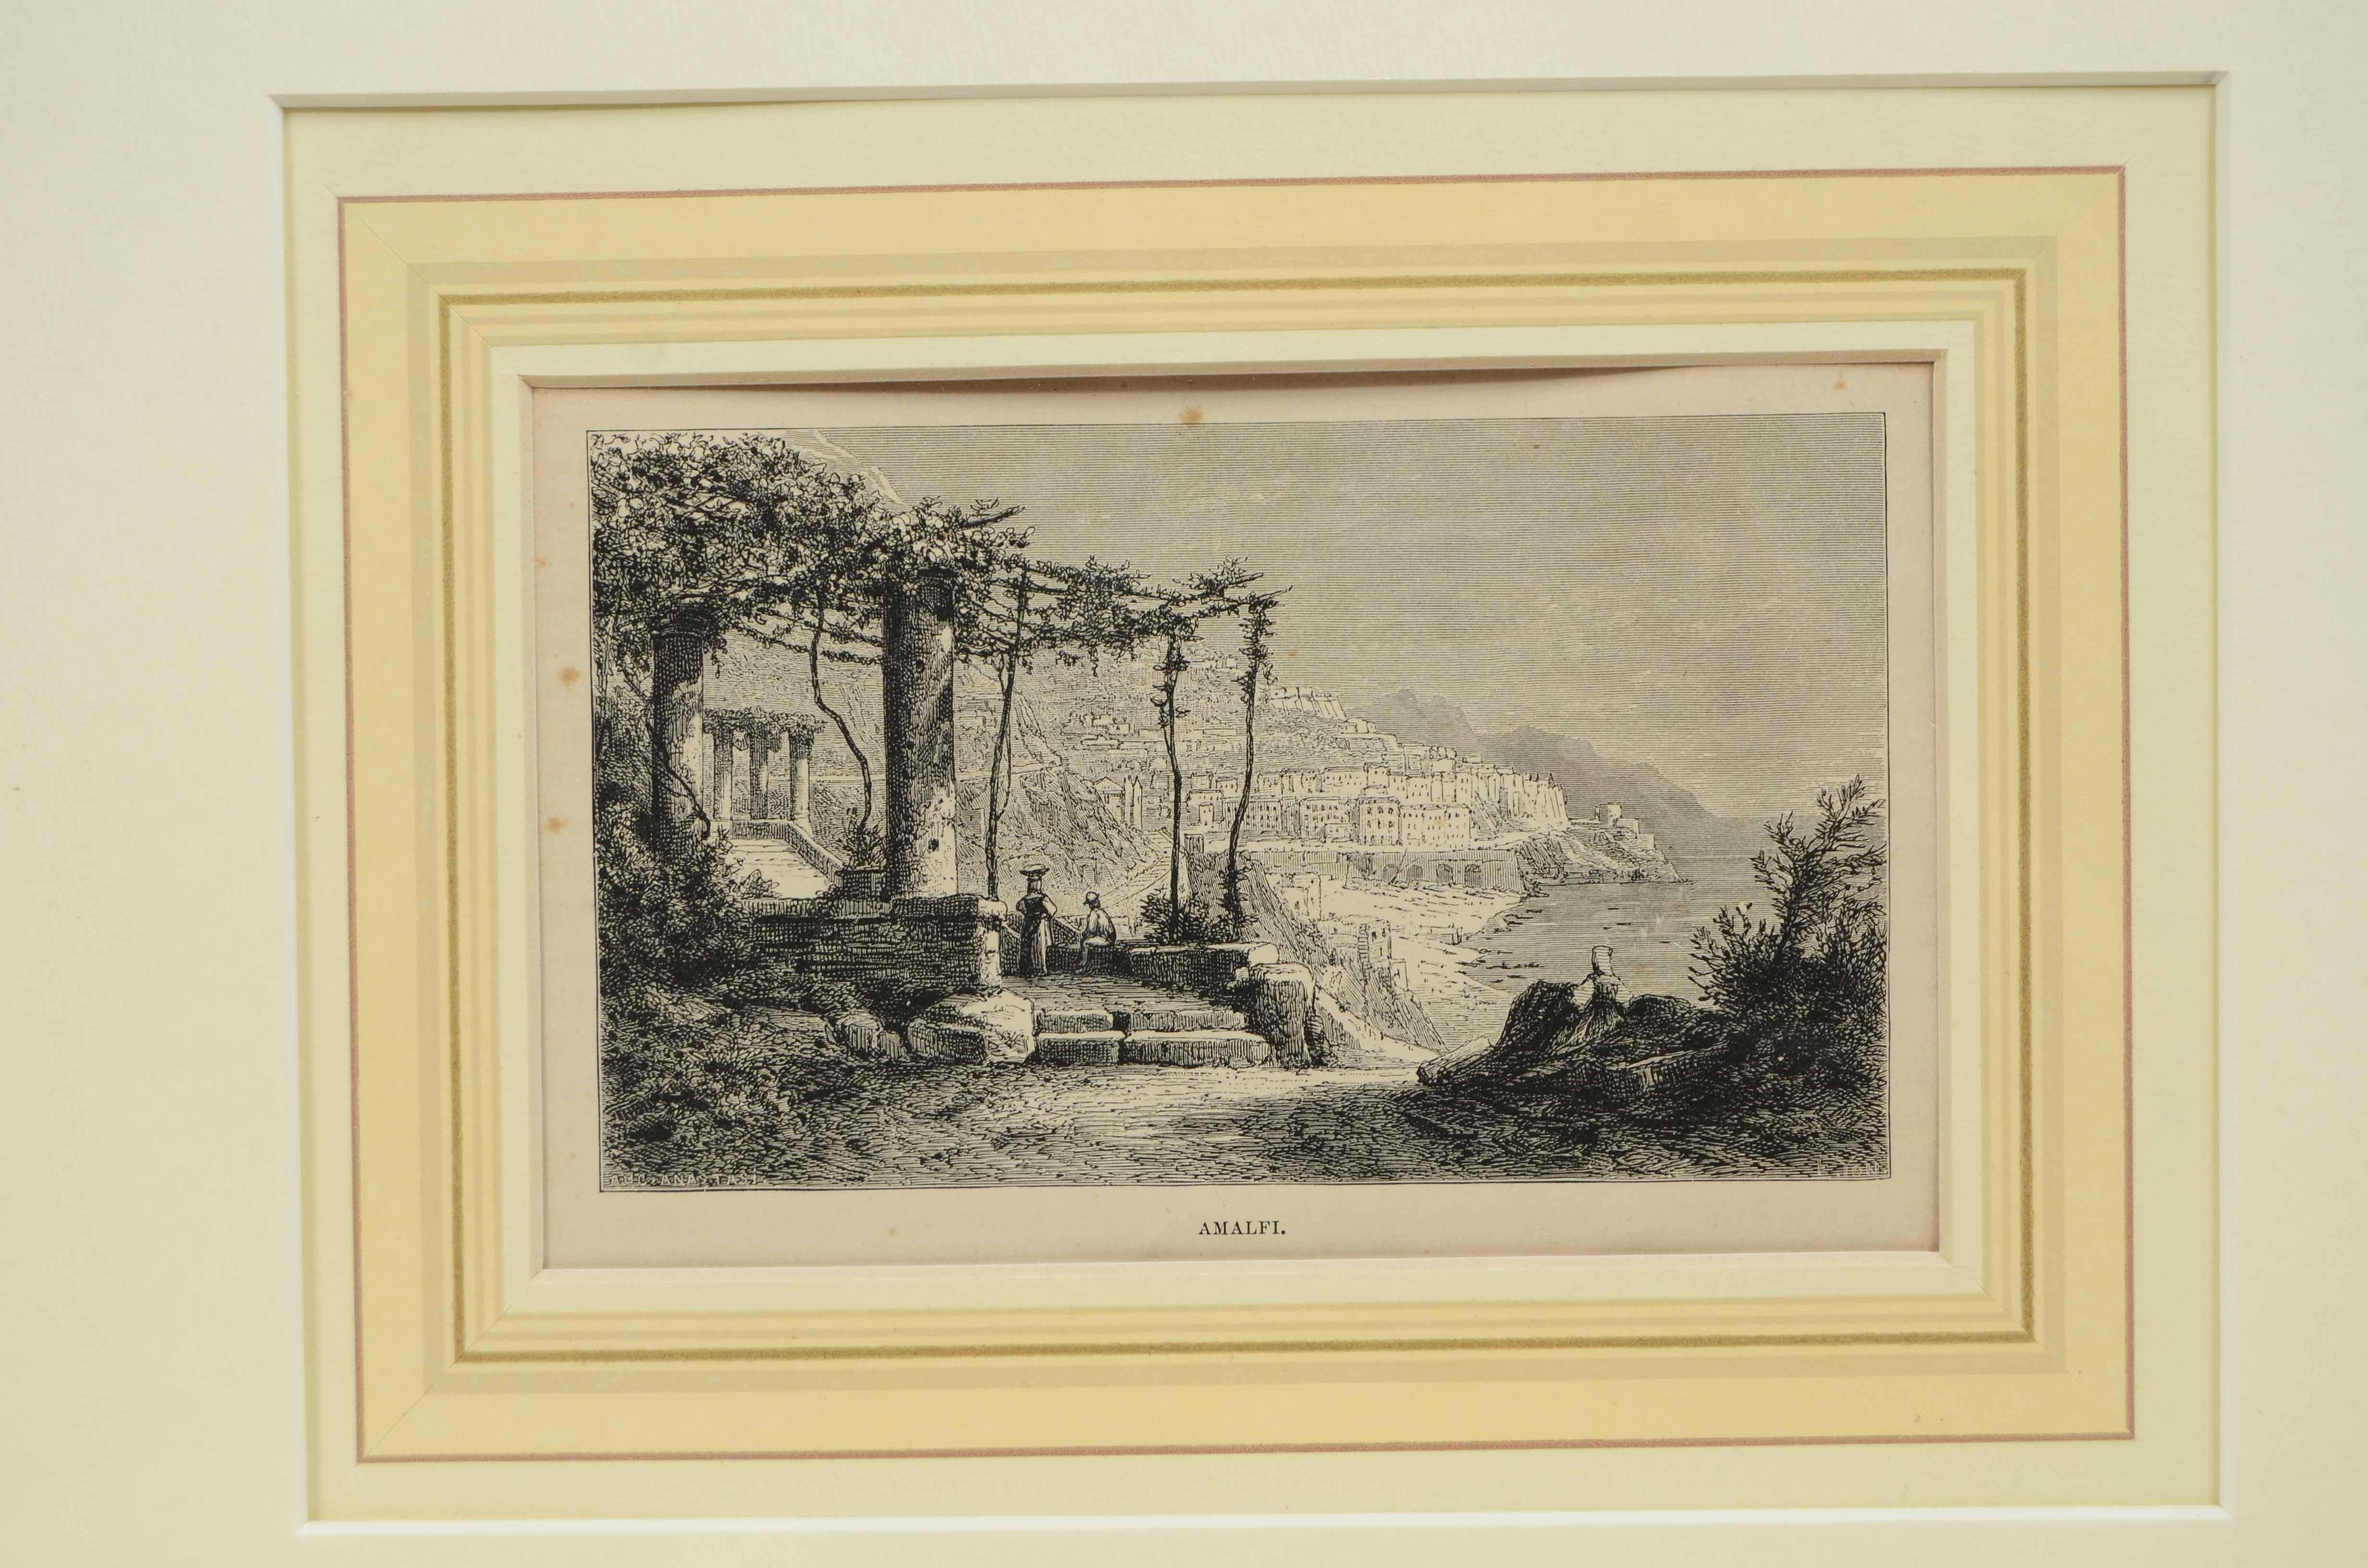 Lithograph on paper by  Amalfi in the province of Salerno Italy datable to around the mid-19th century depicting  the view of the ancient ruins with the village the perched village and the sea, signed lower right Auguste Anastasi. 
Non coeval frame.